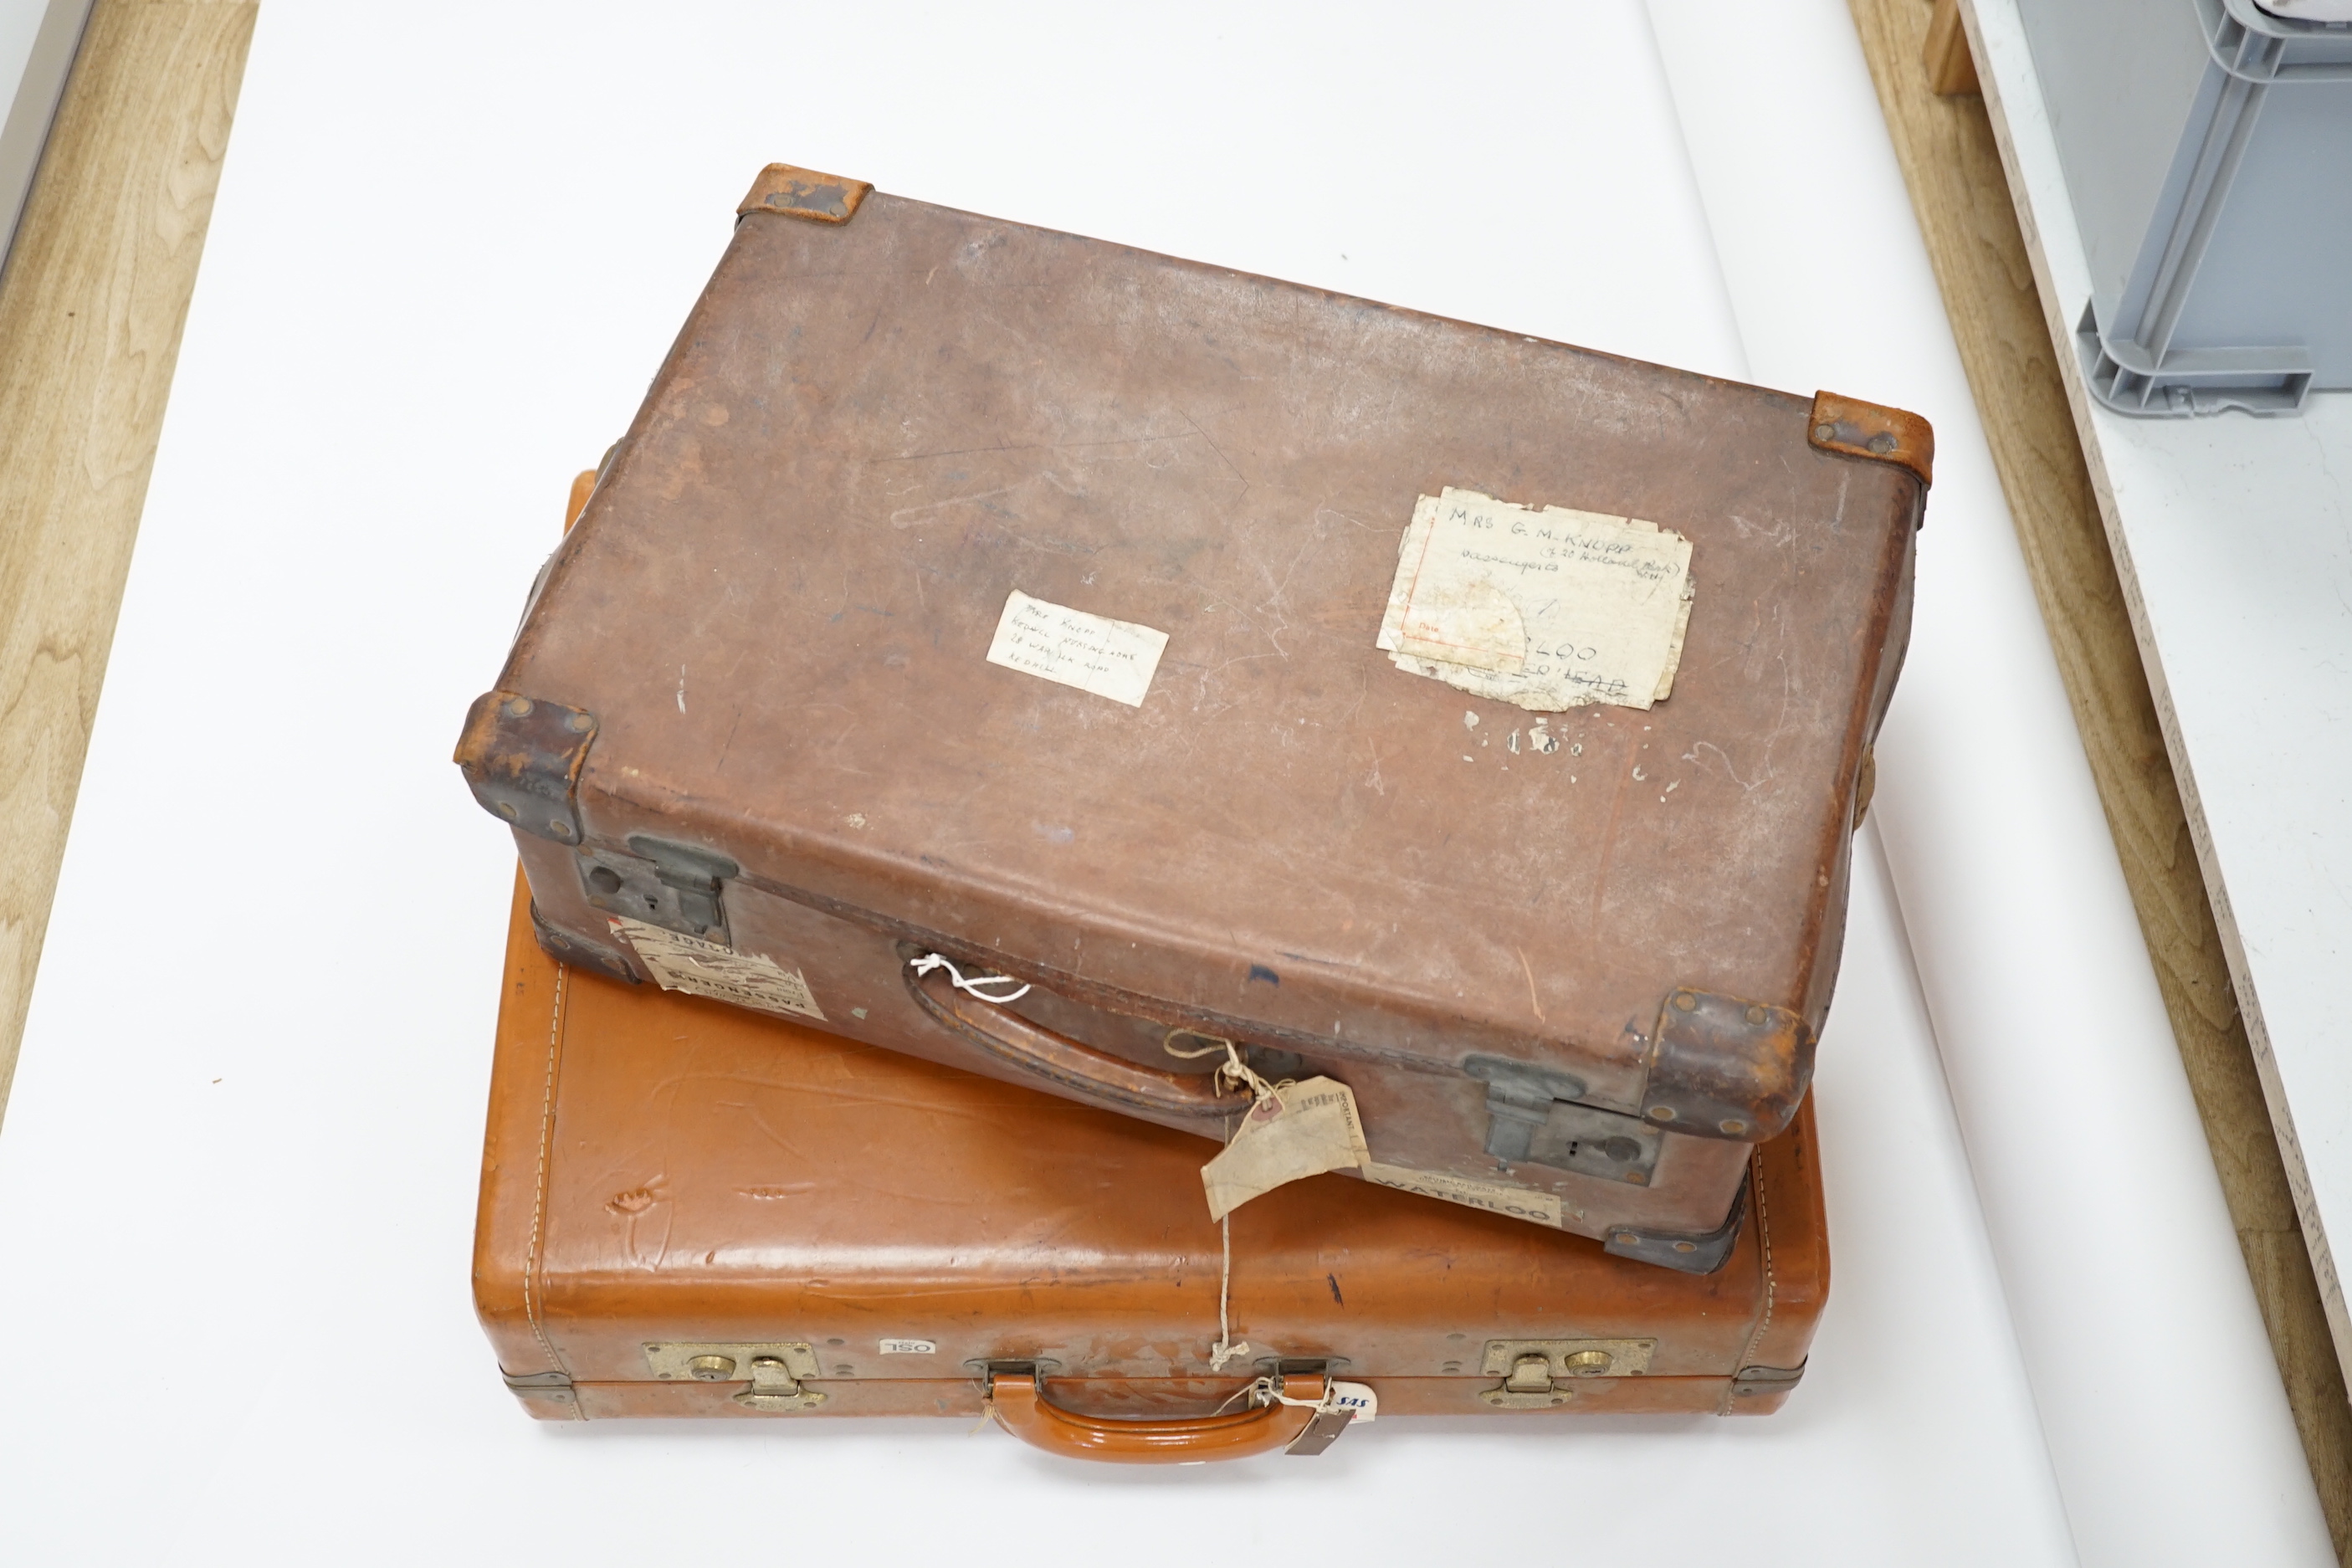 Two vintage suitcases with various labels including British Railways Waterloo, the largest 61cm wide